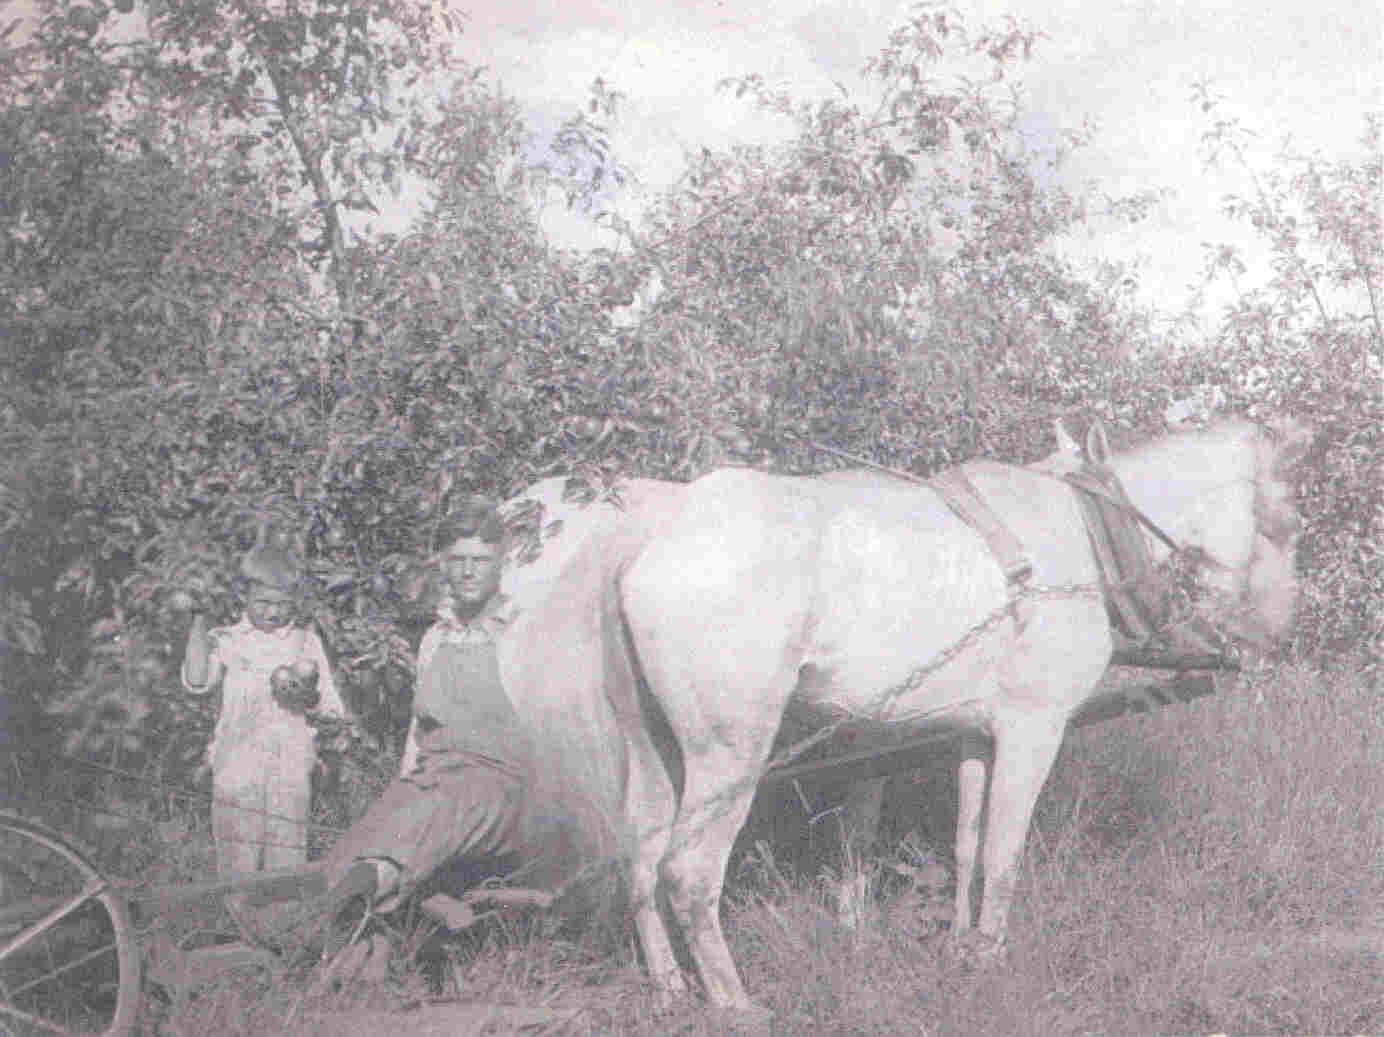 Harold & Leon Copeland plowing the apple orchard